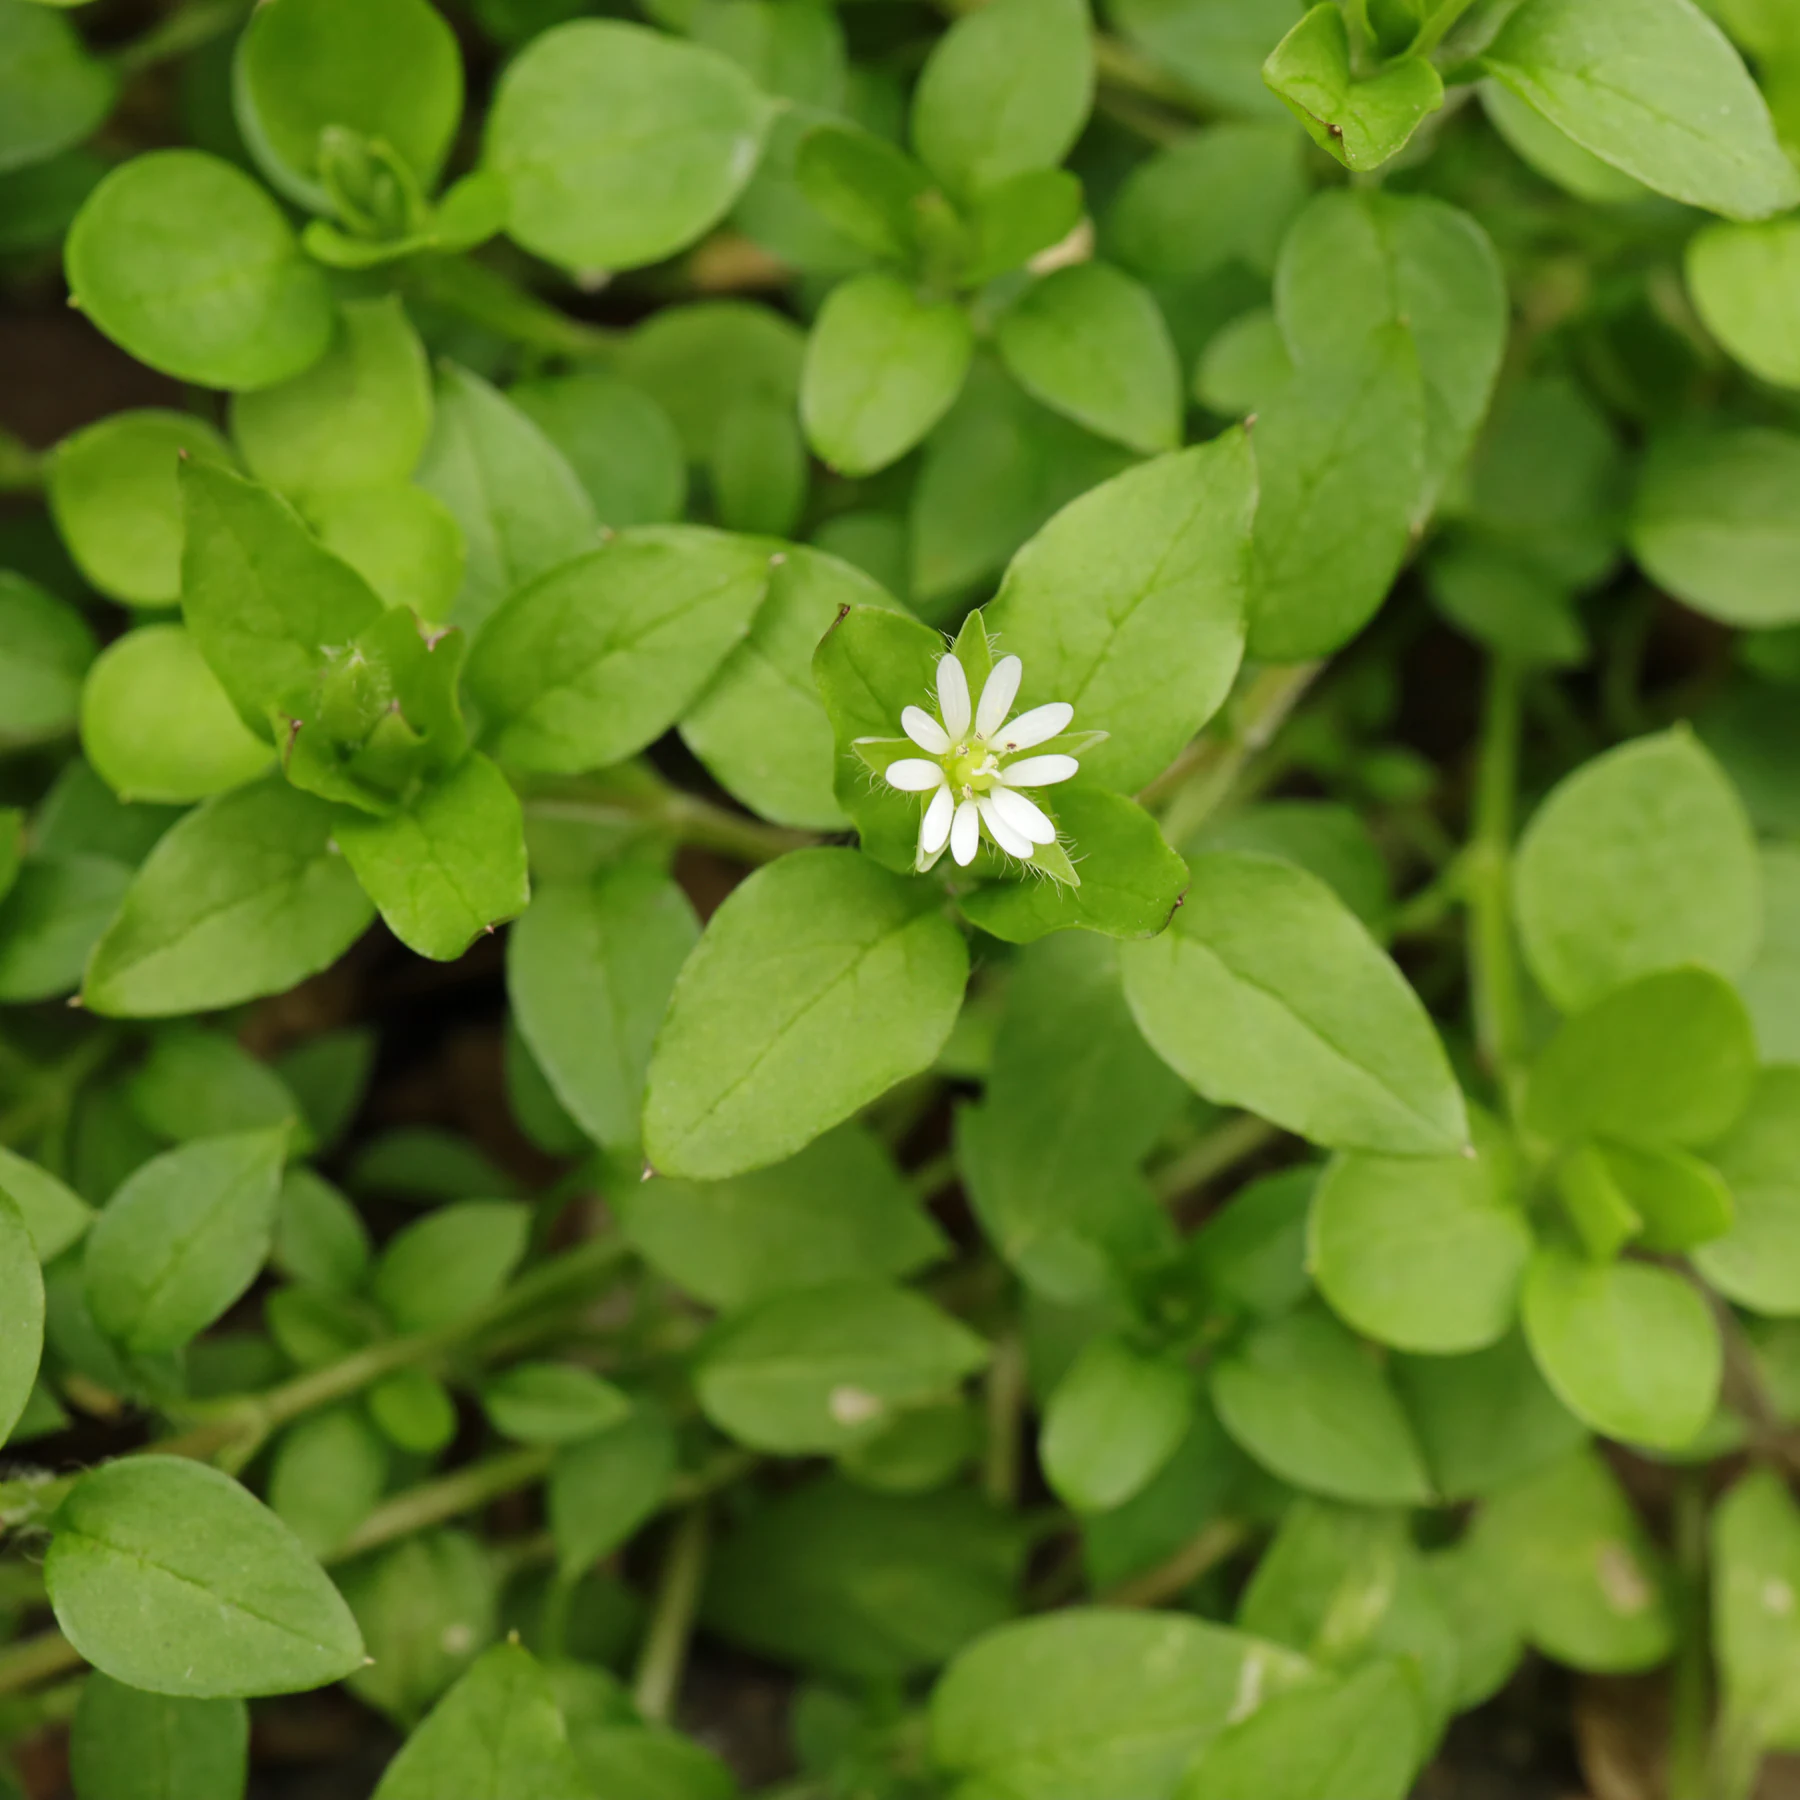 chickweed or common chickweed